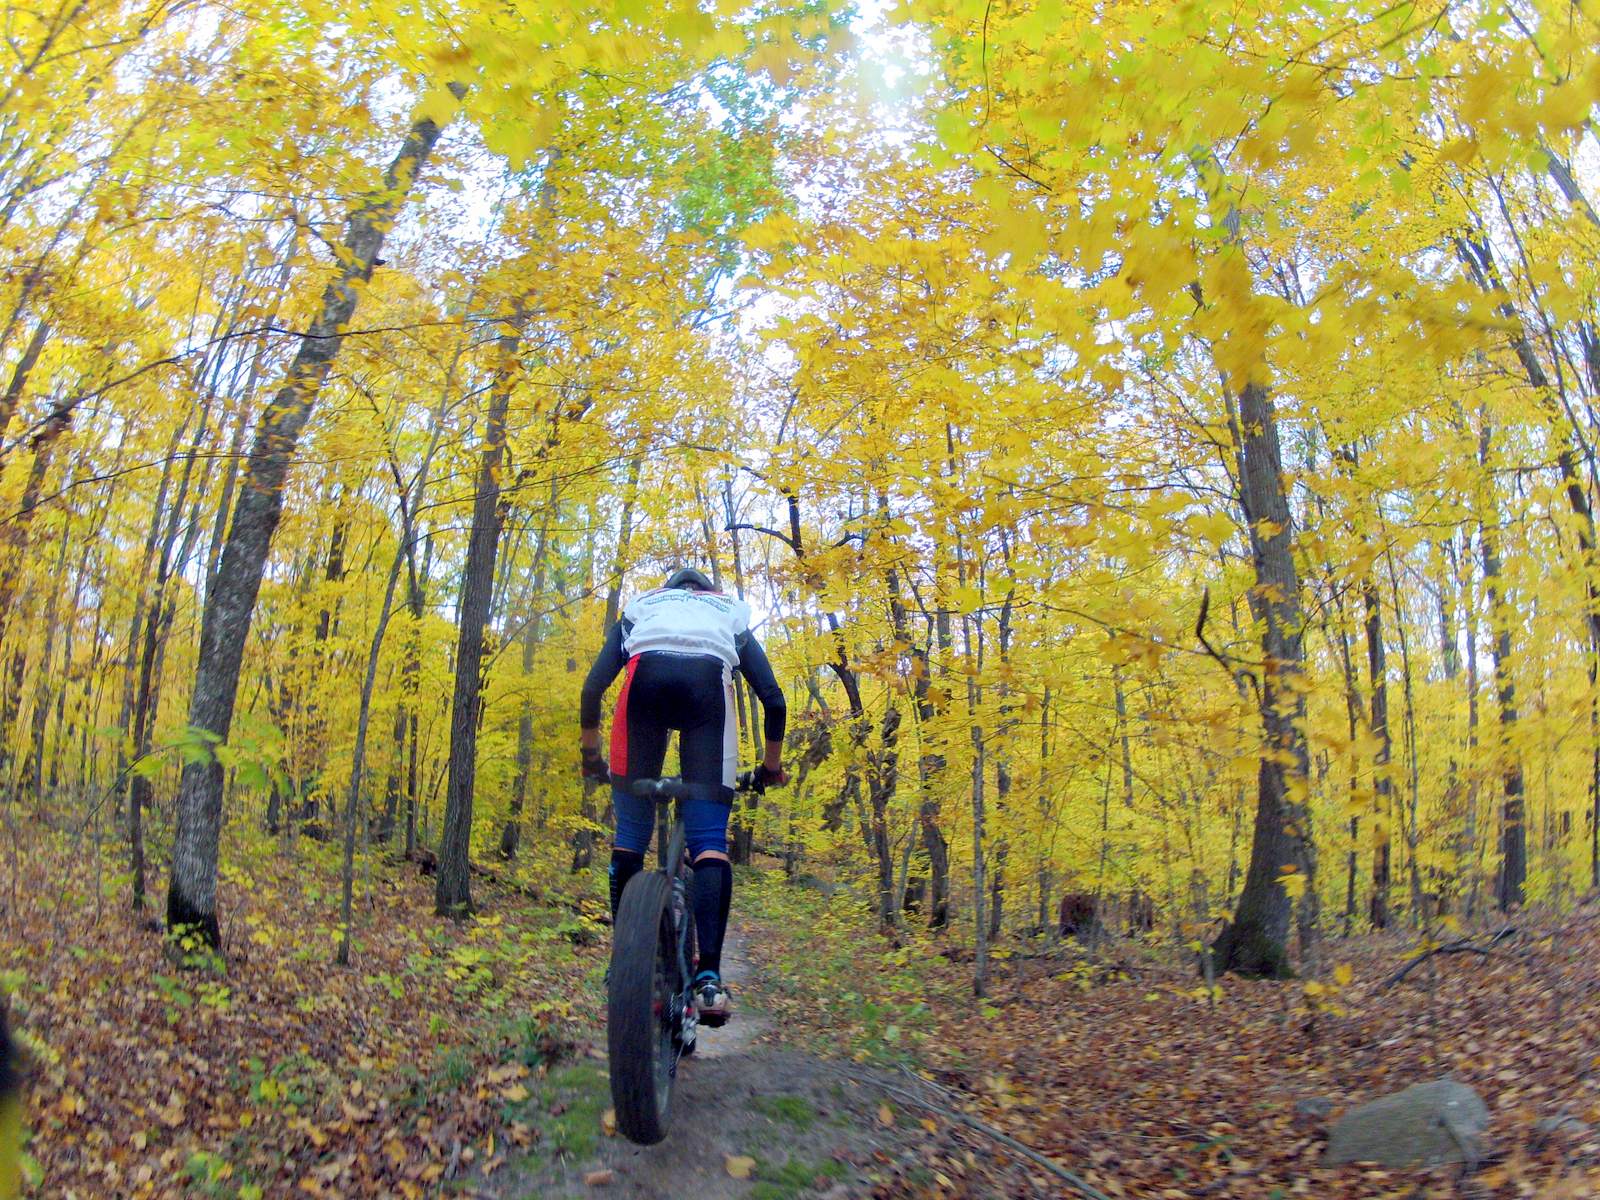 Beautiful fall riding on the mountain bike course, October 8th, 2016.